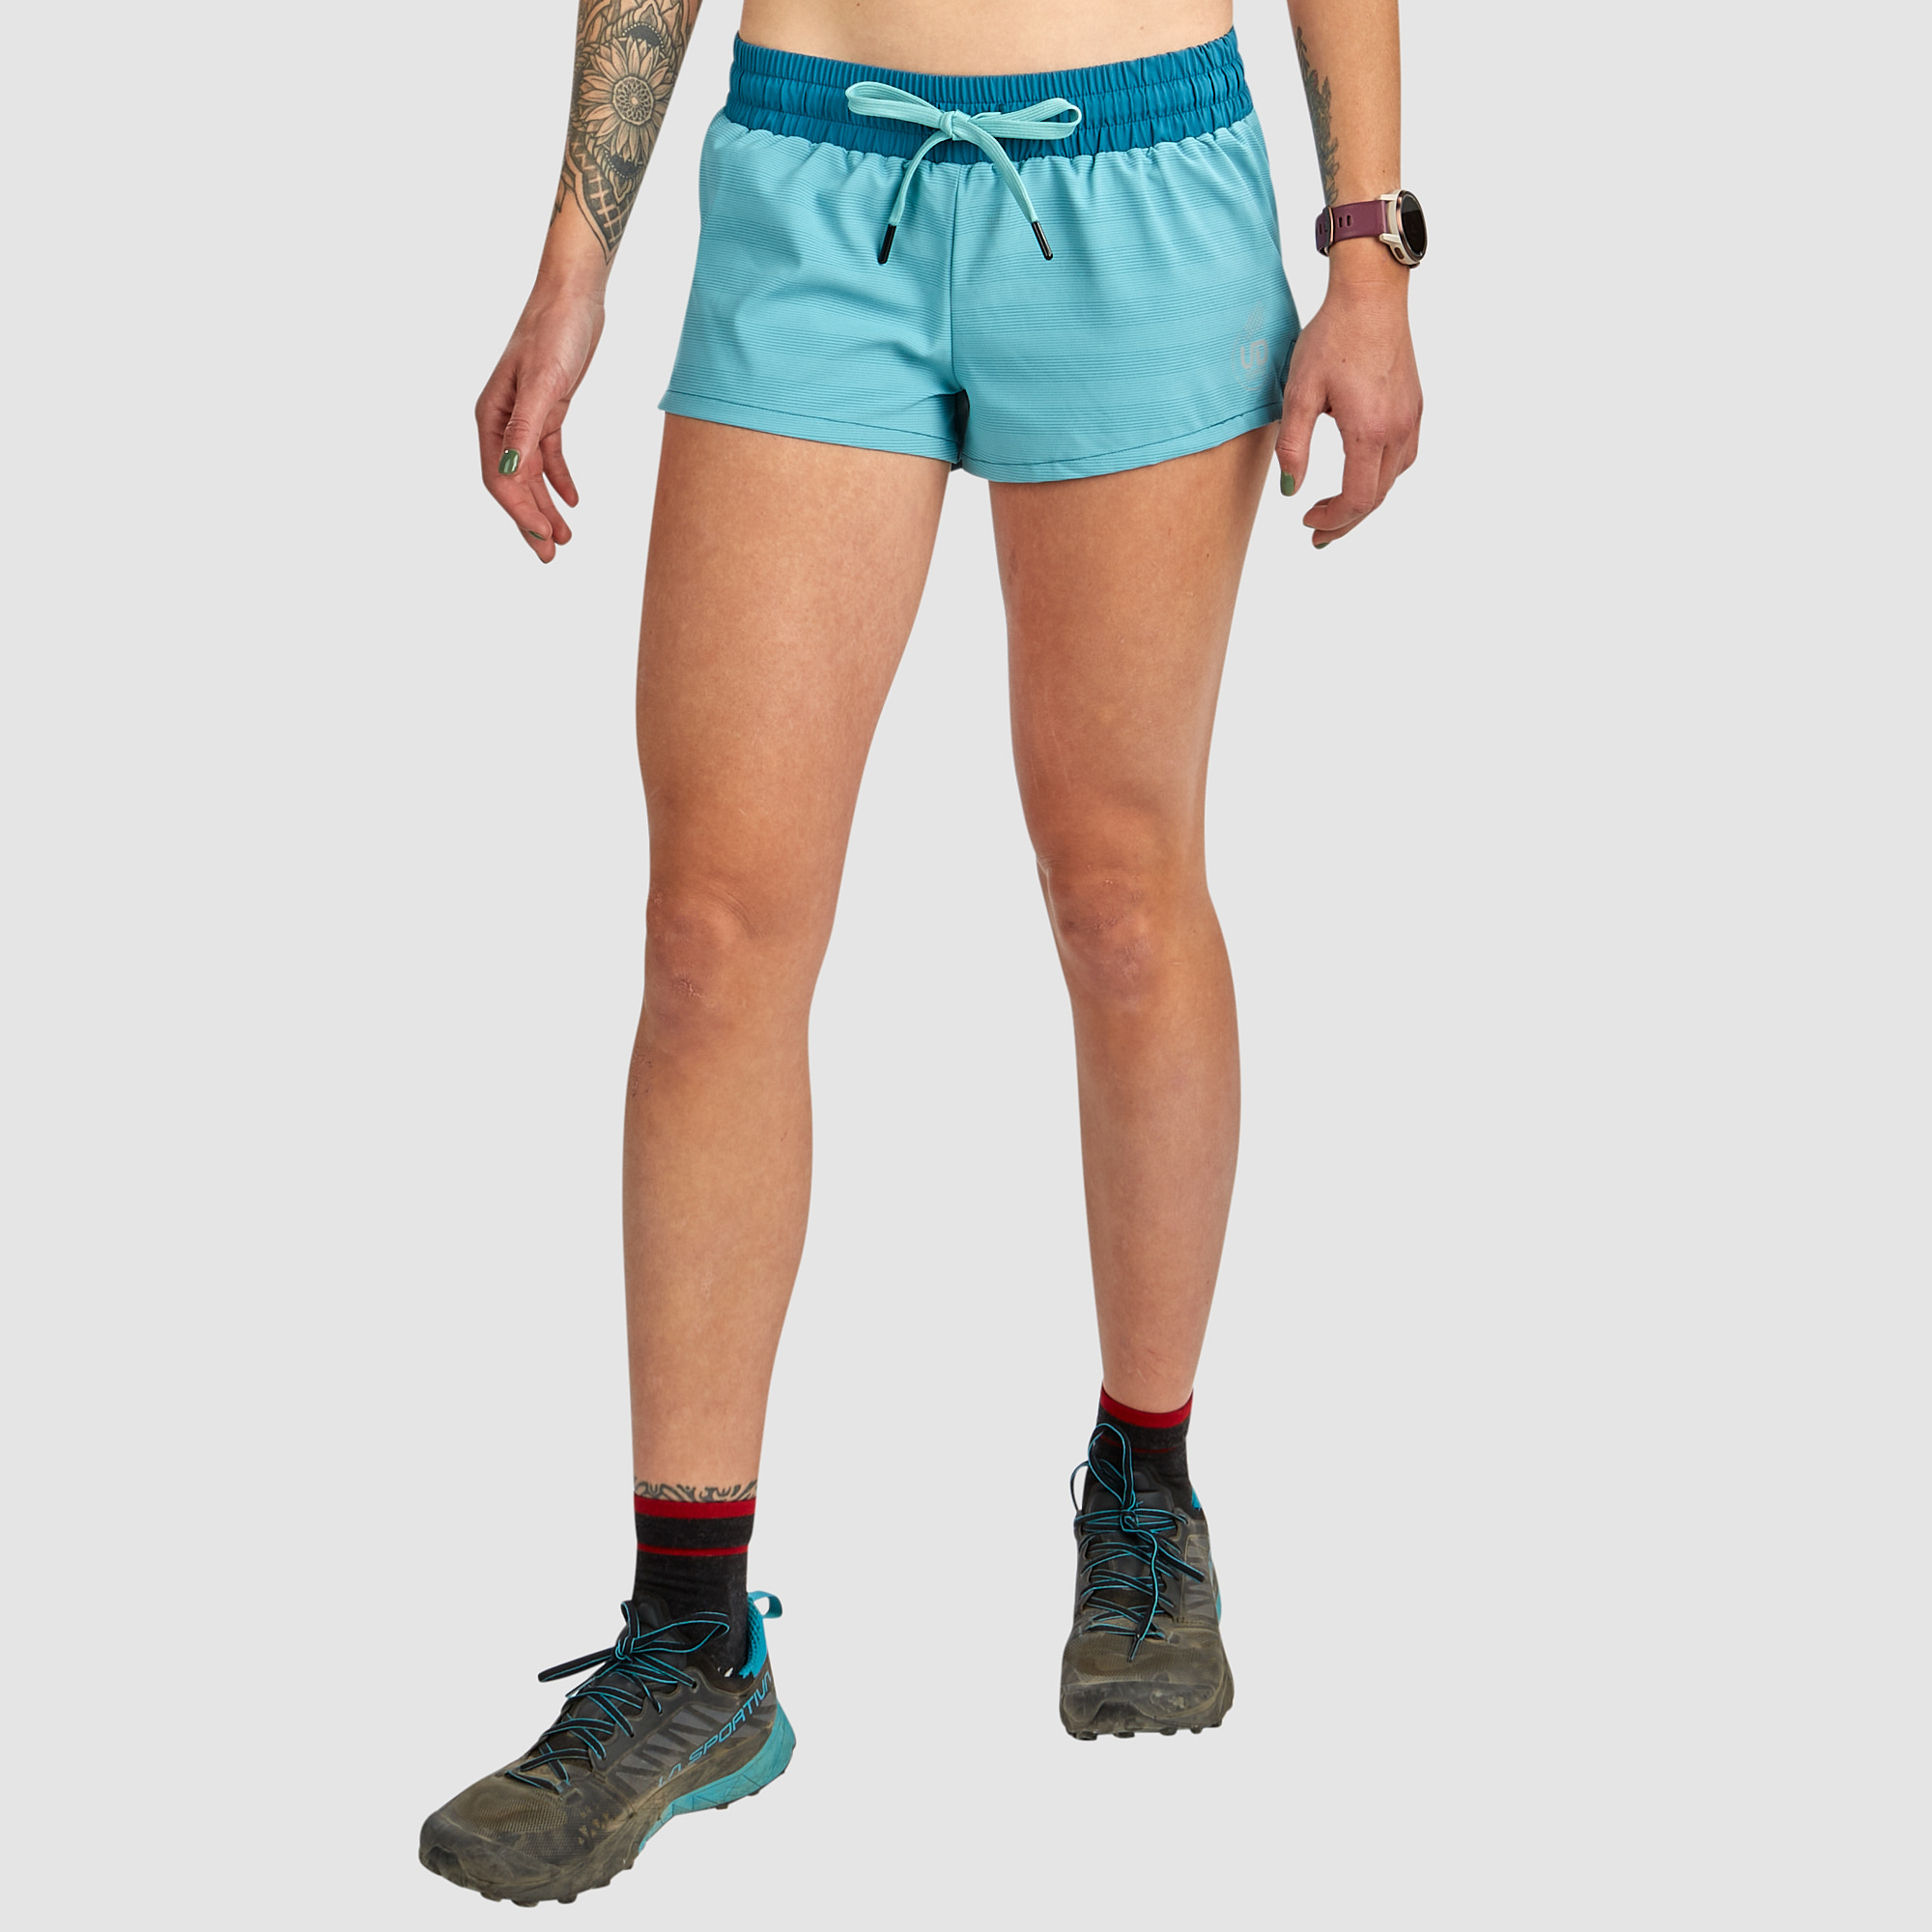 Ultimate Direction Women's Stratus Short - Prior Year in Vintage Turquoise Size Large